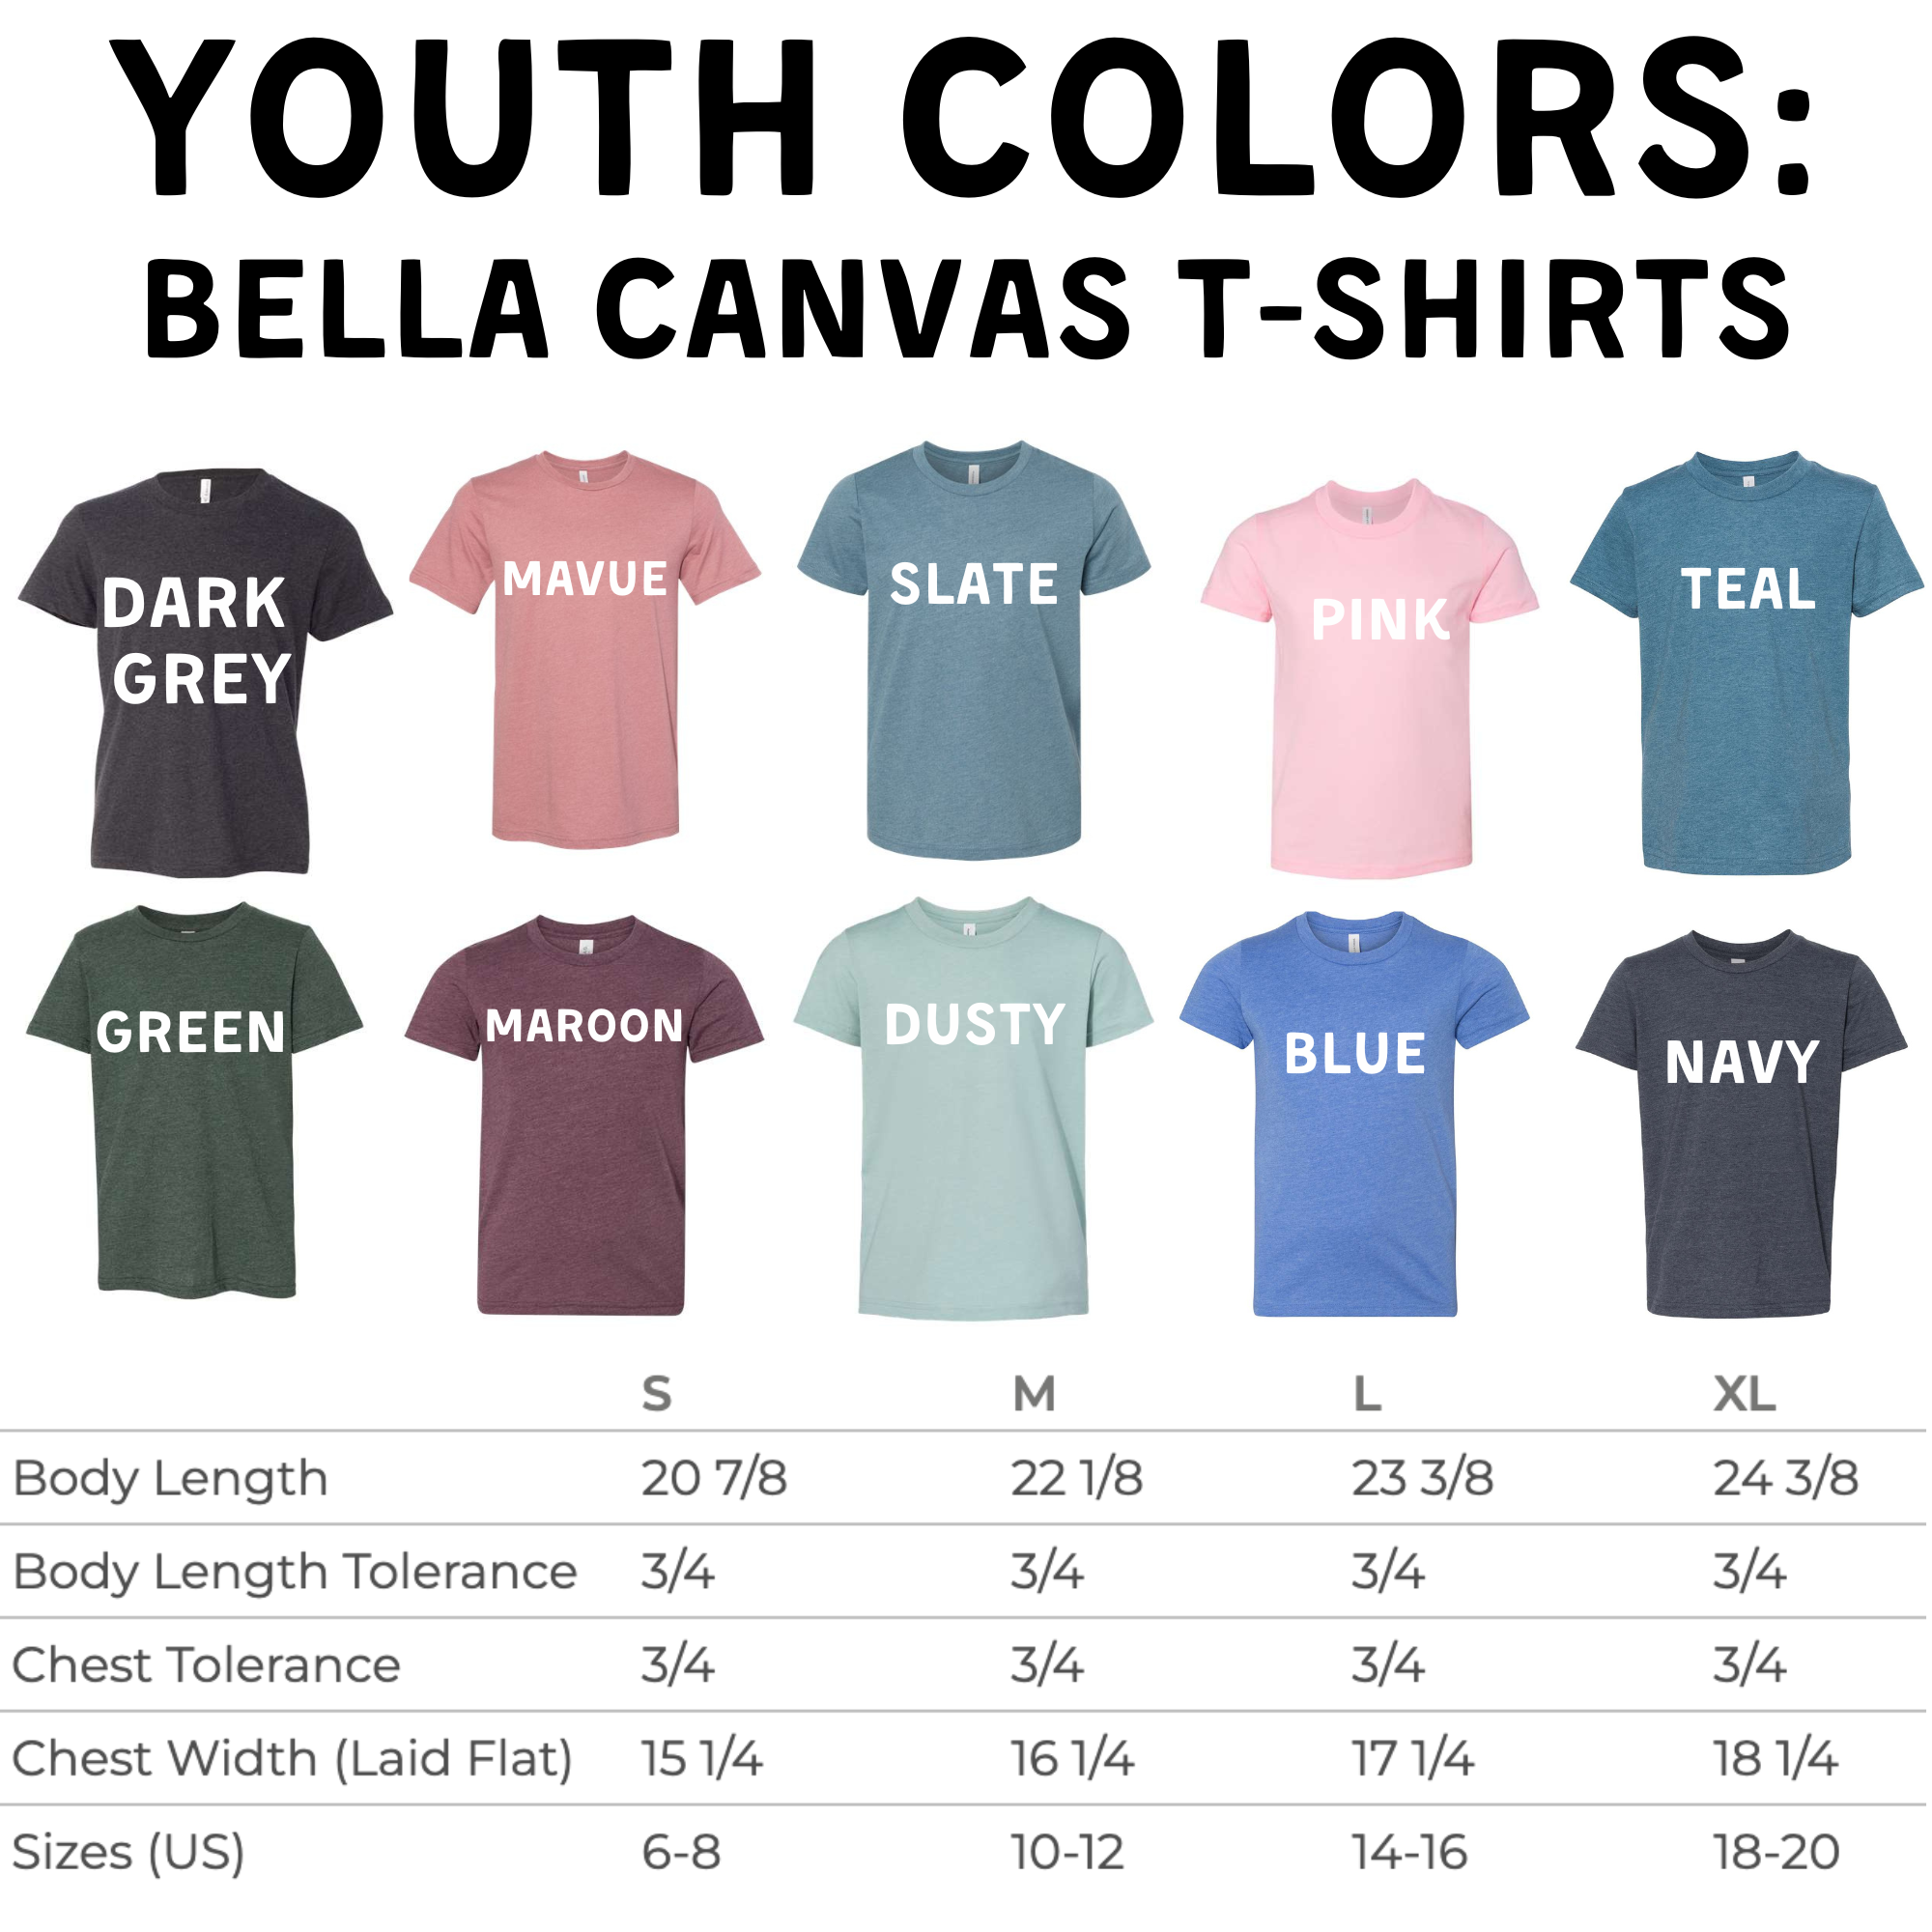 Small Business Youth T-Shirt-Baby & Toddler-208 Tees Wholesale, Idaho